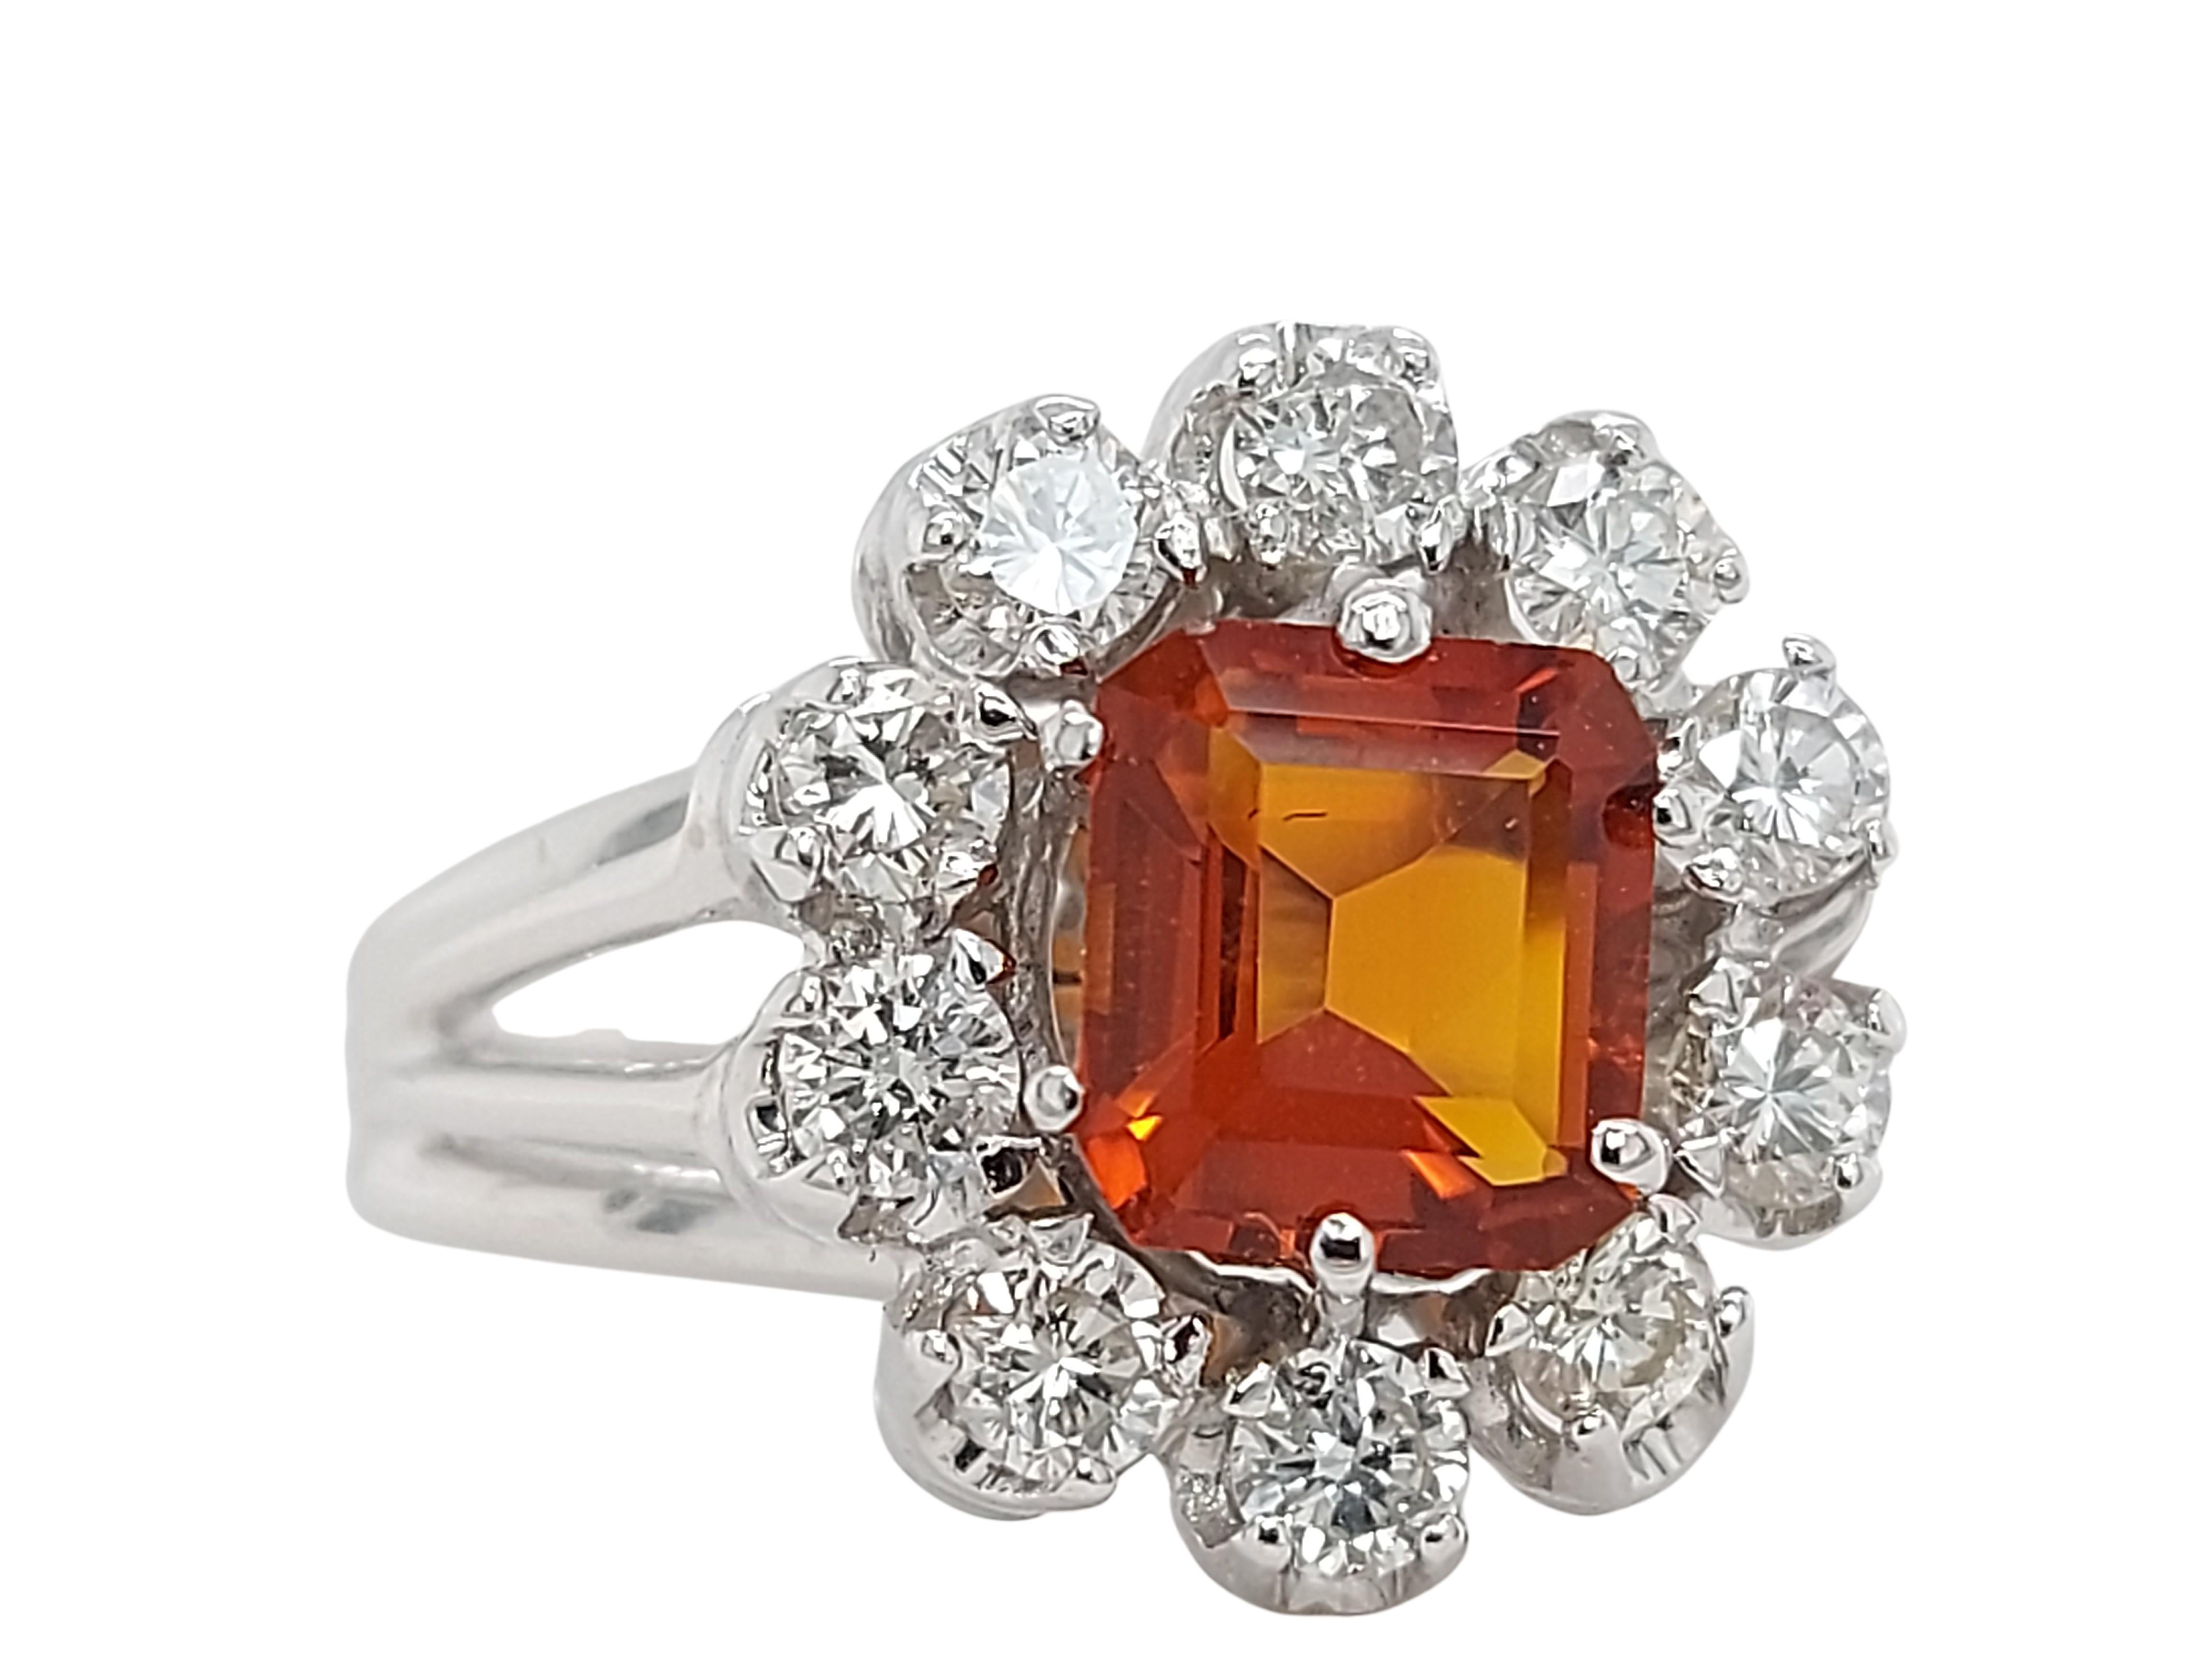 Stunning Ring with a big citrine stone surrounded by diamonds

Centre stone: Citrine, 1 Ct.

Diamonds: 10 brilliant cut diamonds

Material: 18kt white gold

Ring size: 51 EU / 5 1/2 US ( can be resized for free)

Total weight: 5.5 gram / 0.195 oz /